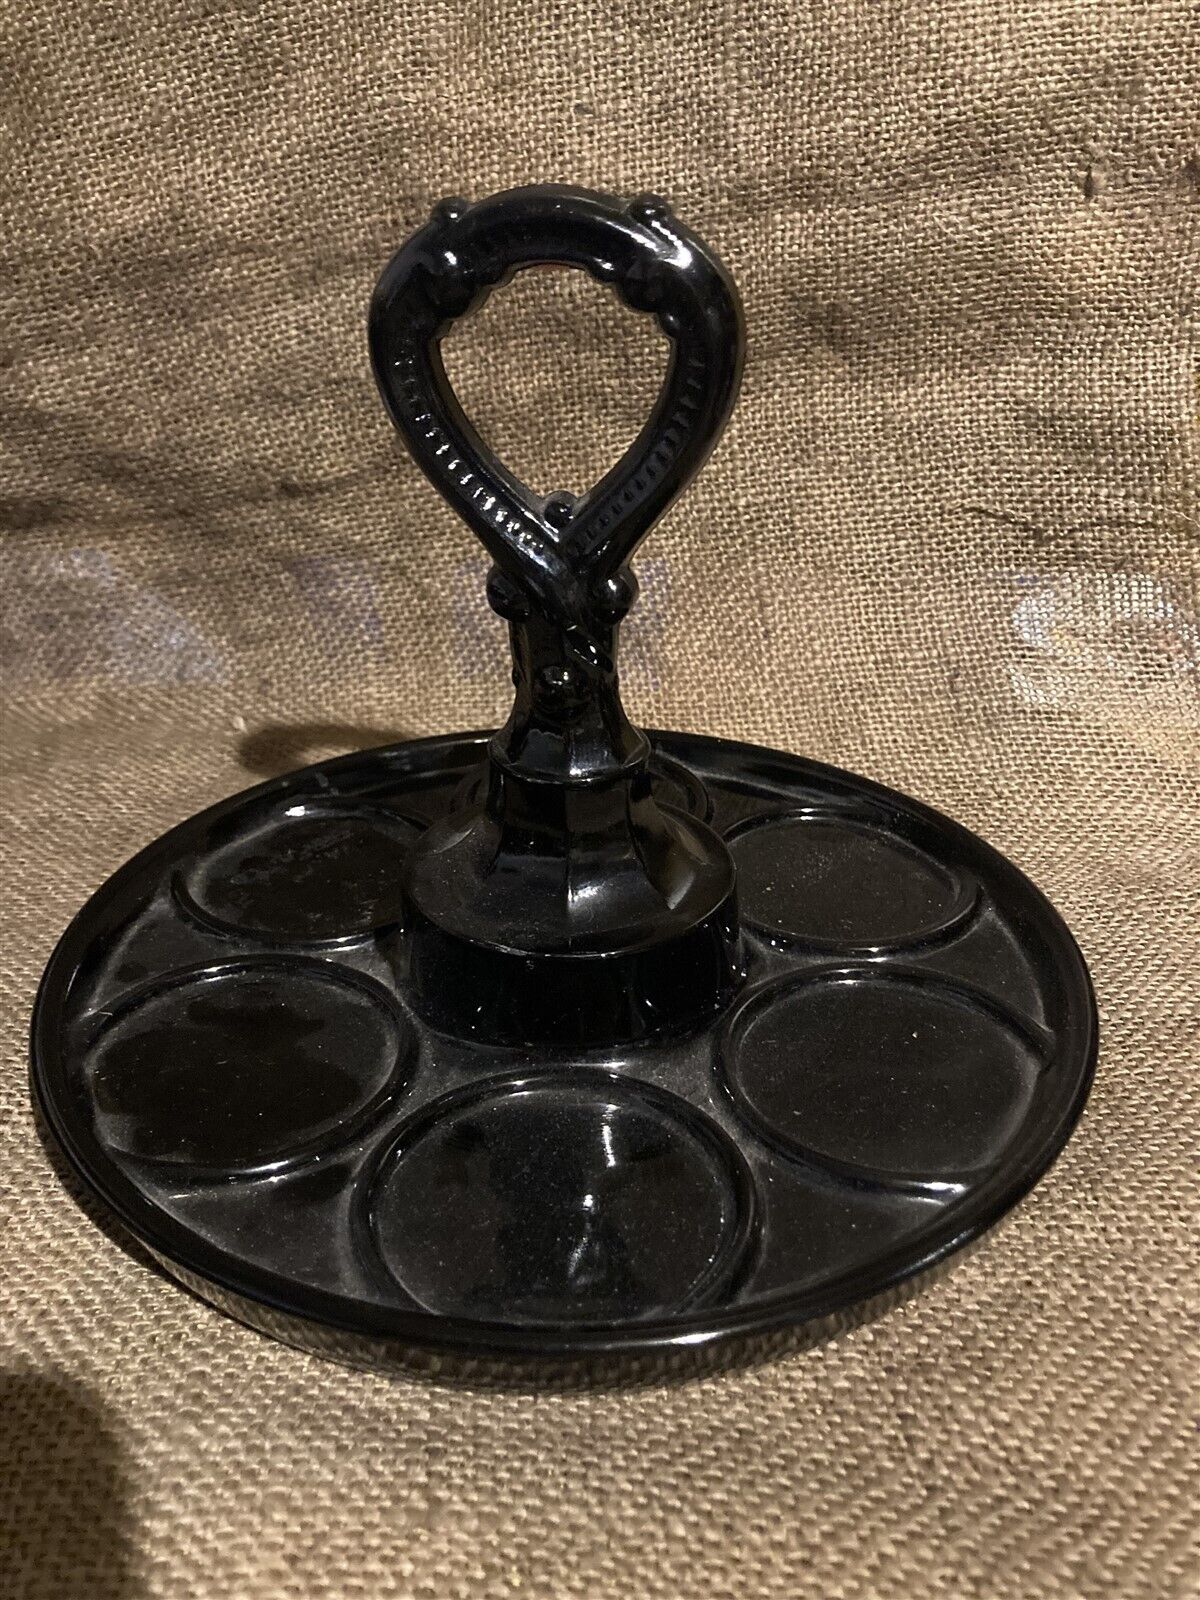 L.E. Smith black amethyst depression glass cordial glass tray, carrier